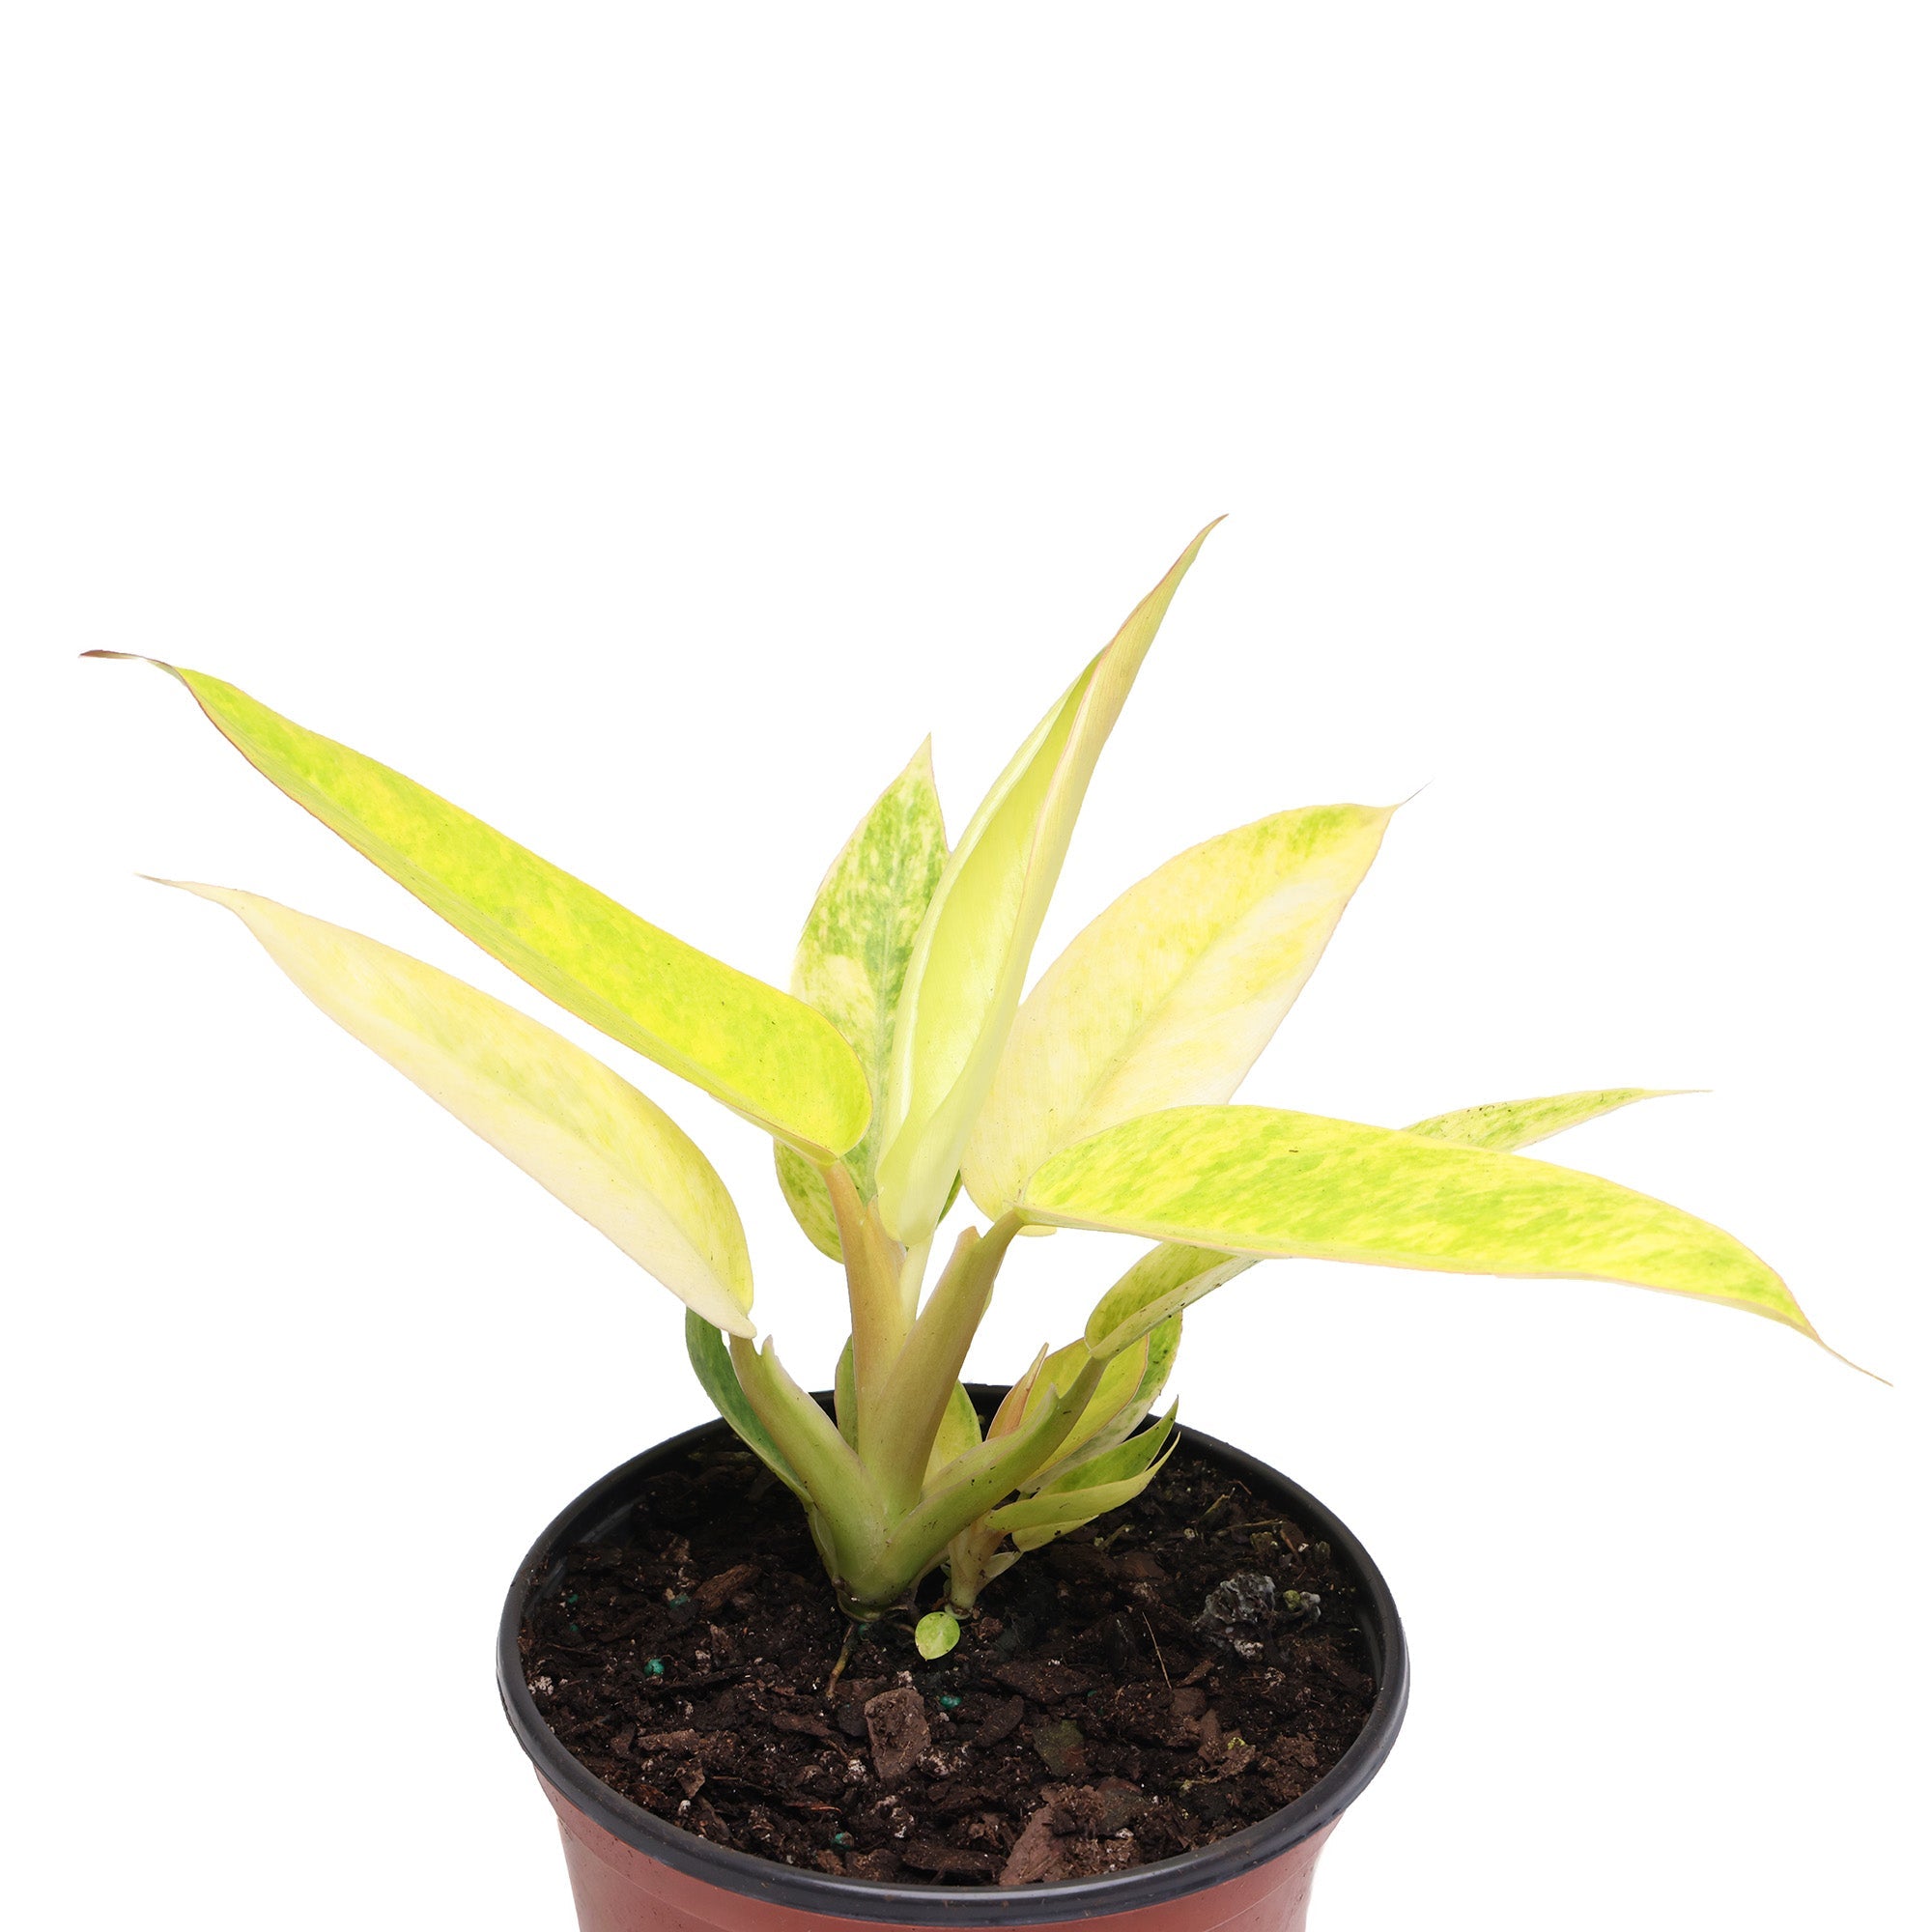 A small Philodendron Calkin Gold 6 Inches plant with slender, yellow and green leaves growing in a brown plastic pot, isolated on a white background by Chive Studio.